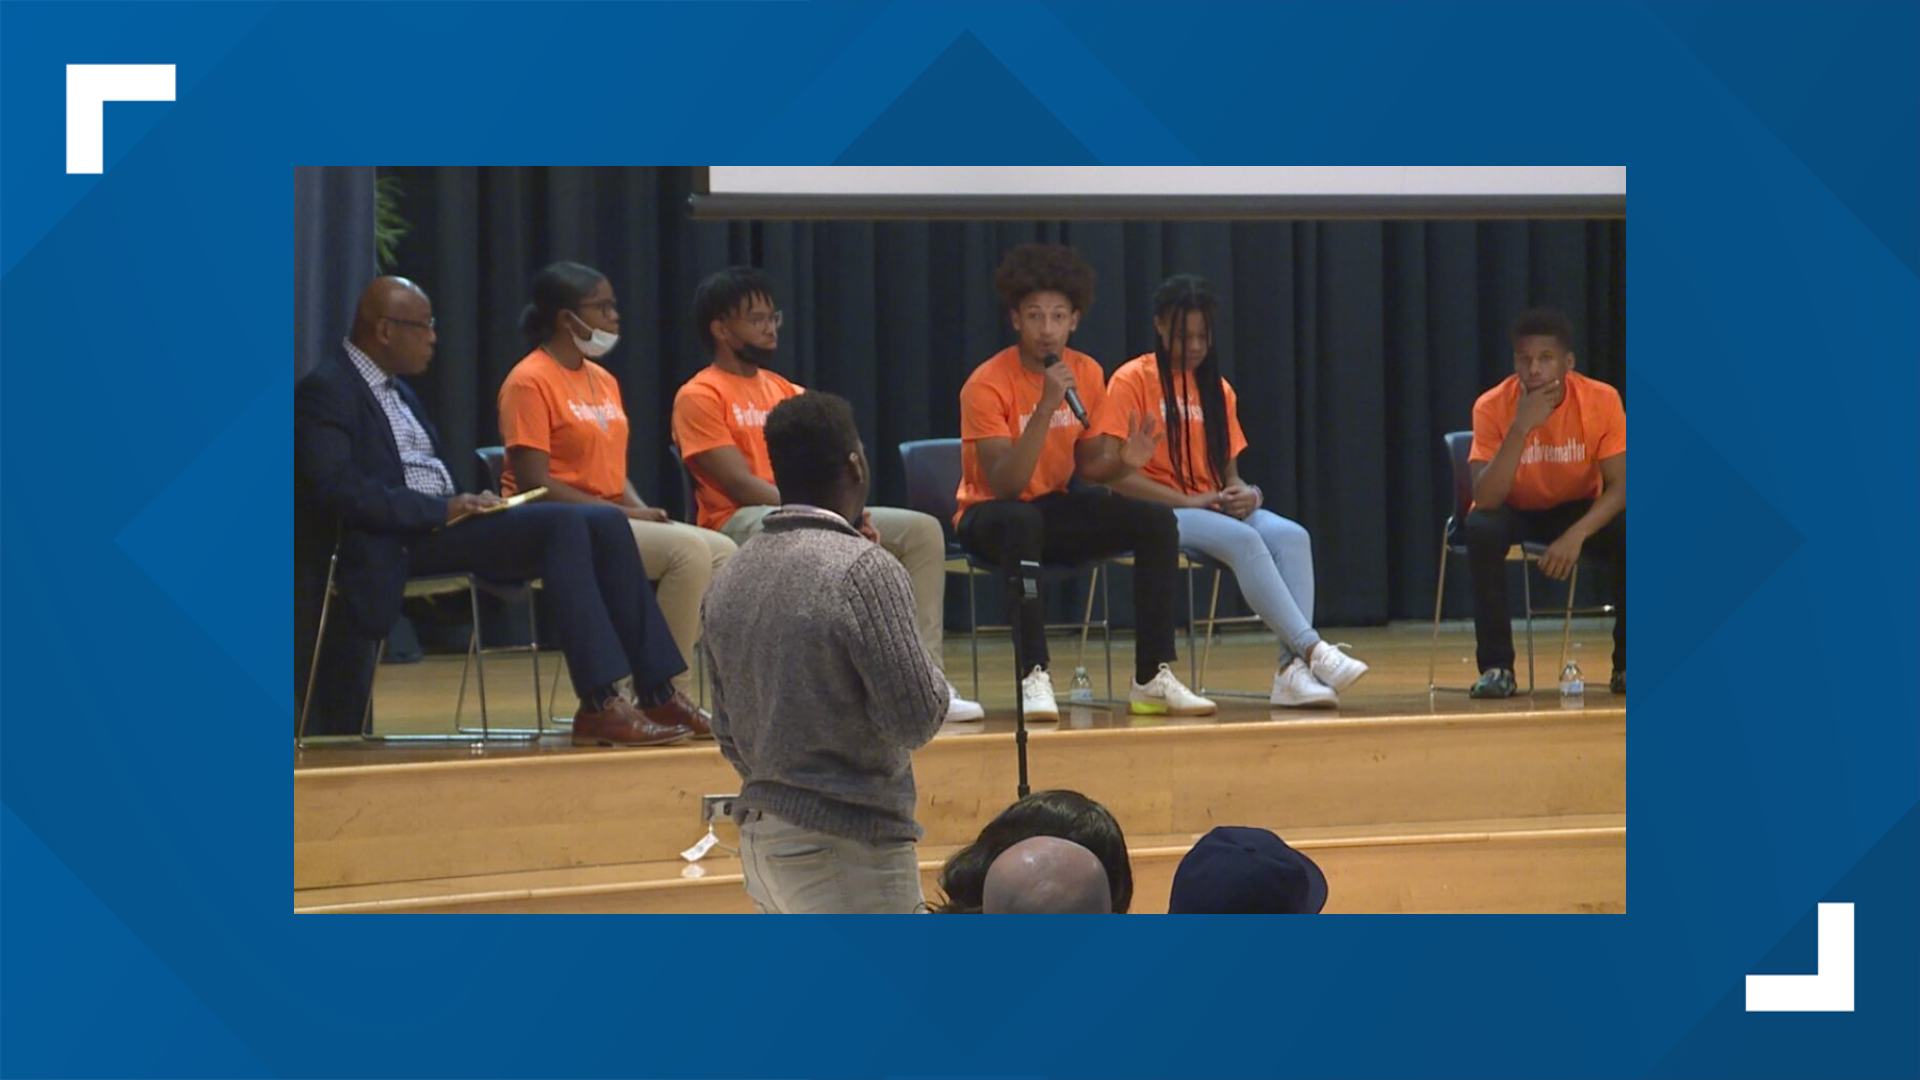 In a youth forum titled "Our Lives Matter," students from Harrisburg High School SciTech Campus shared their experiences dealing with gun violence in the city.